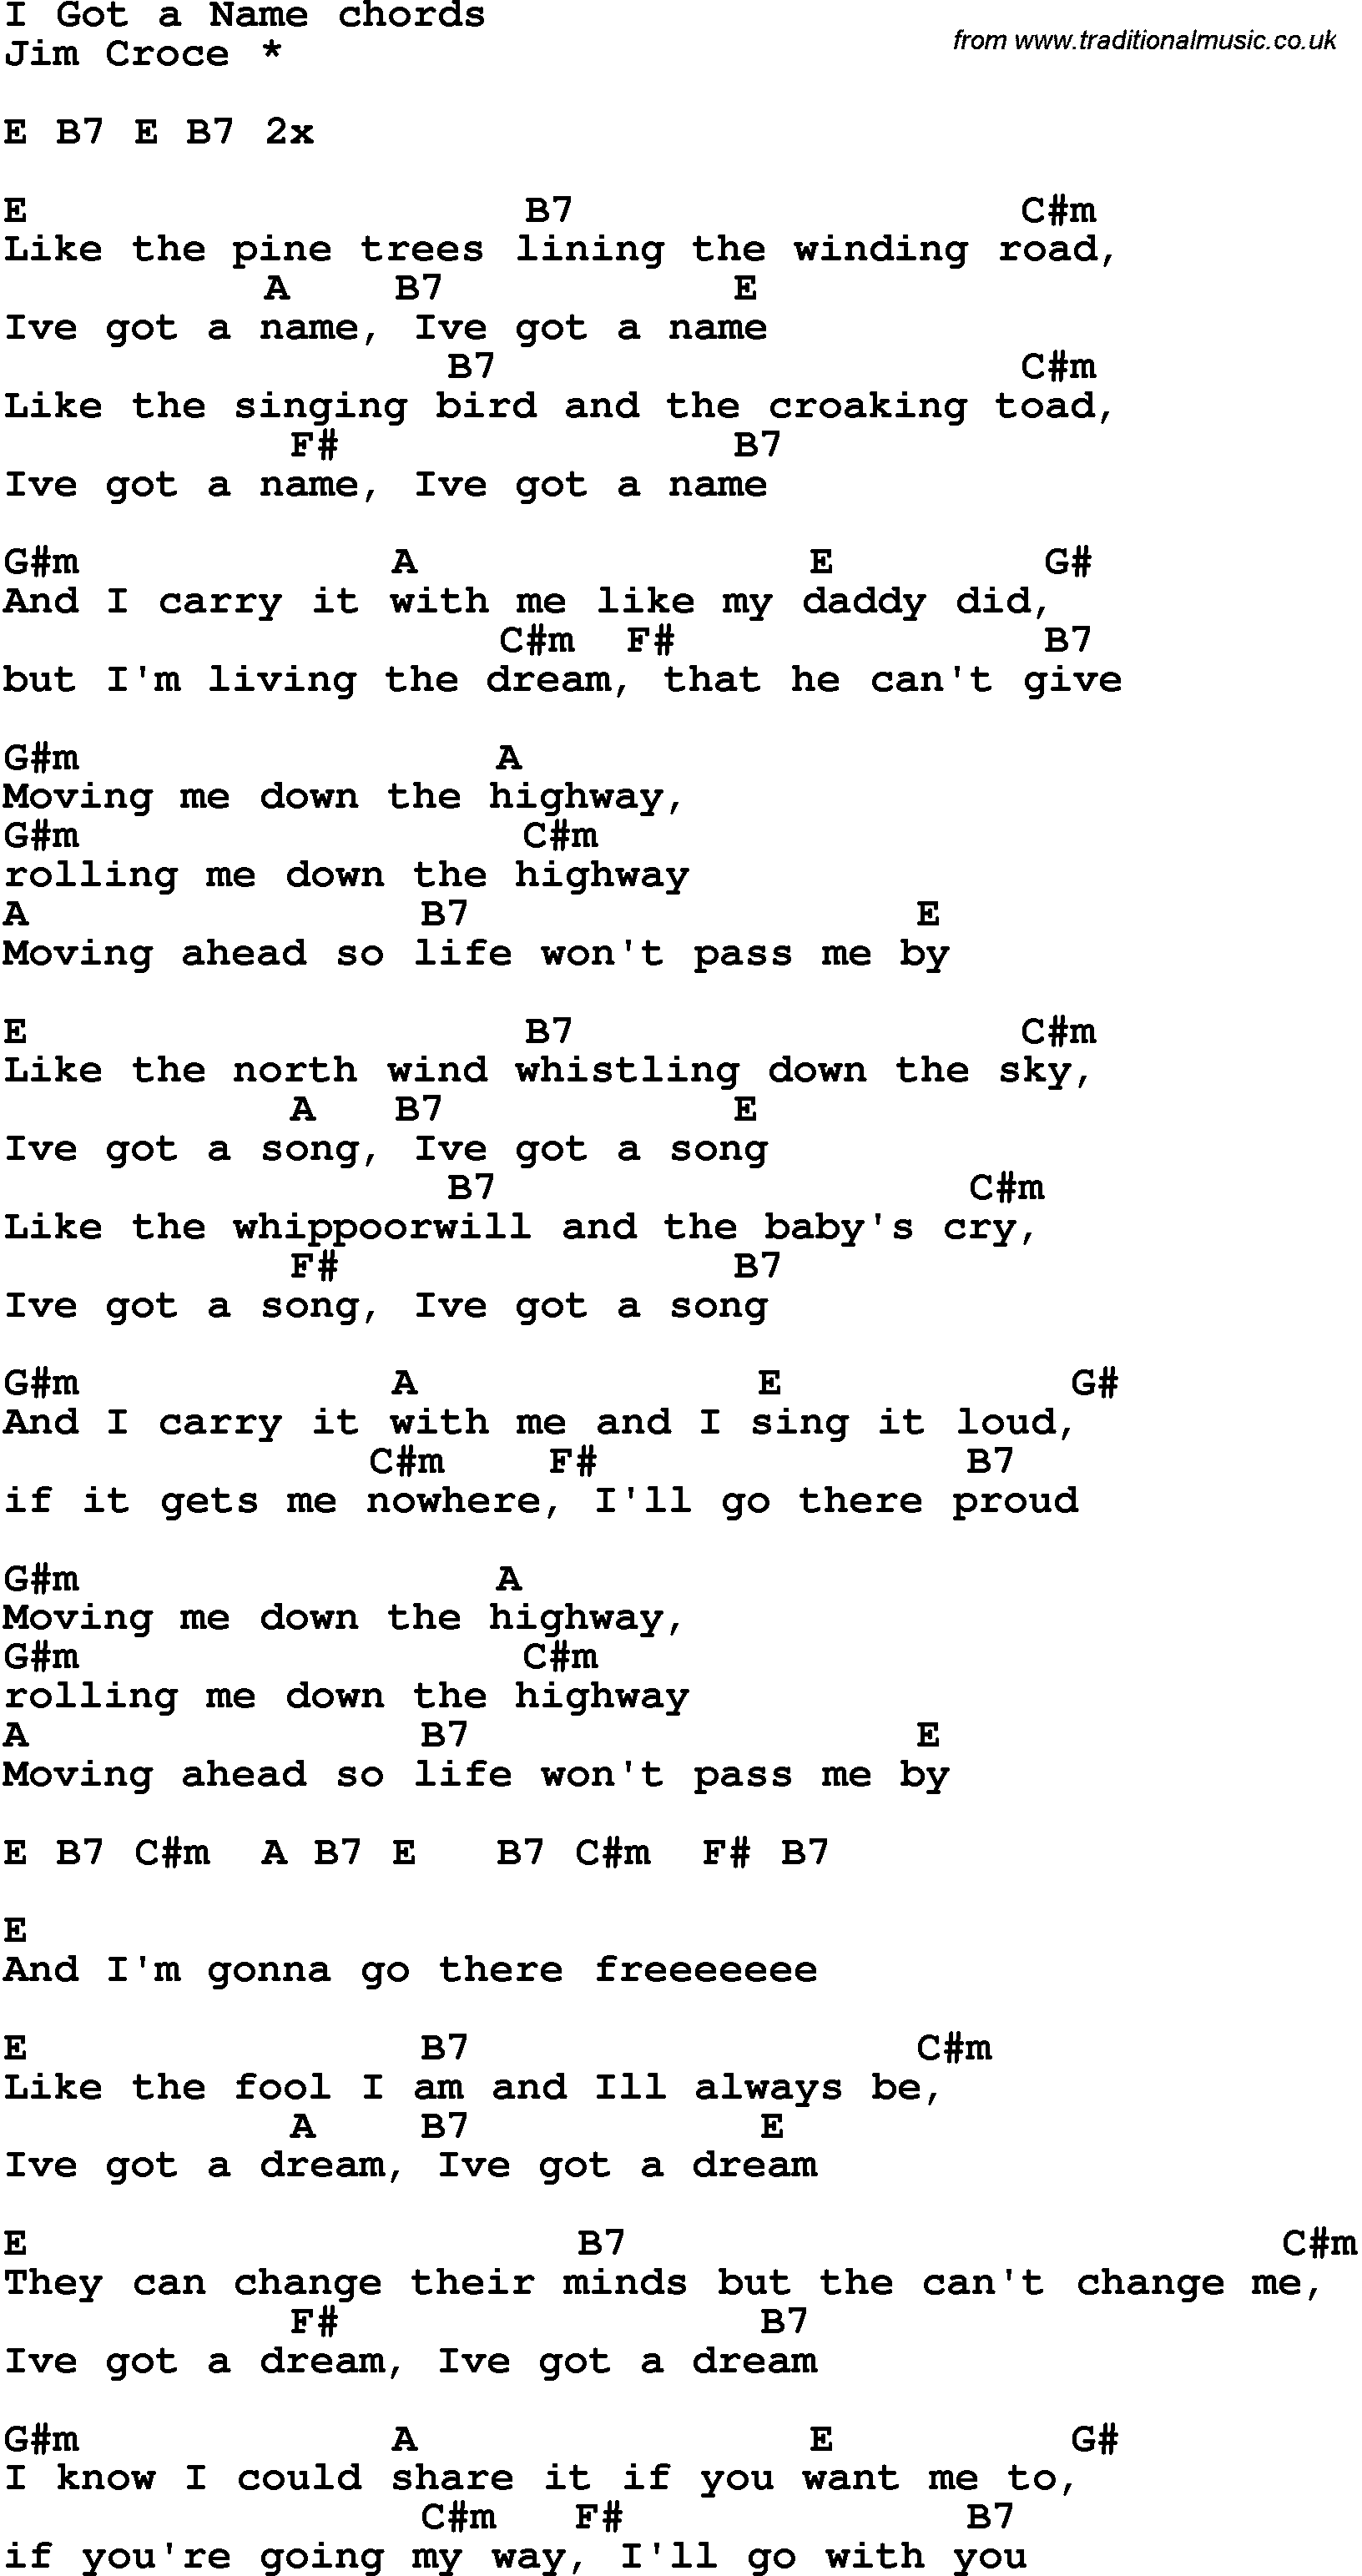 Song Lyrics with guitar chords for I Got A Name